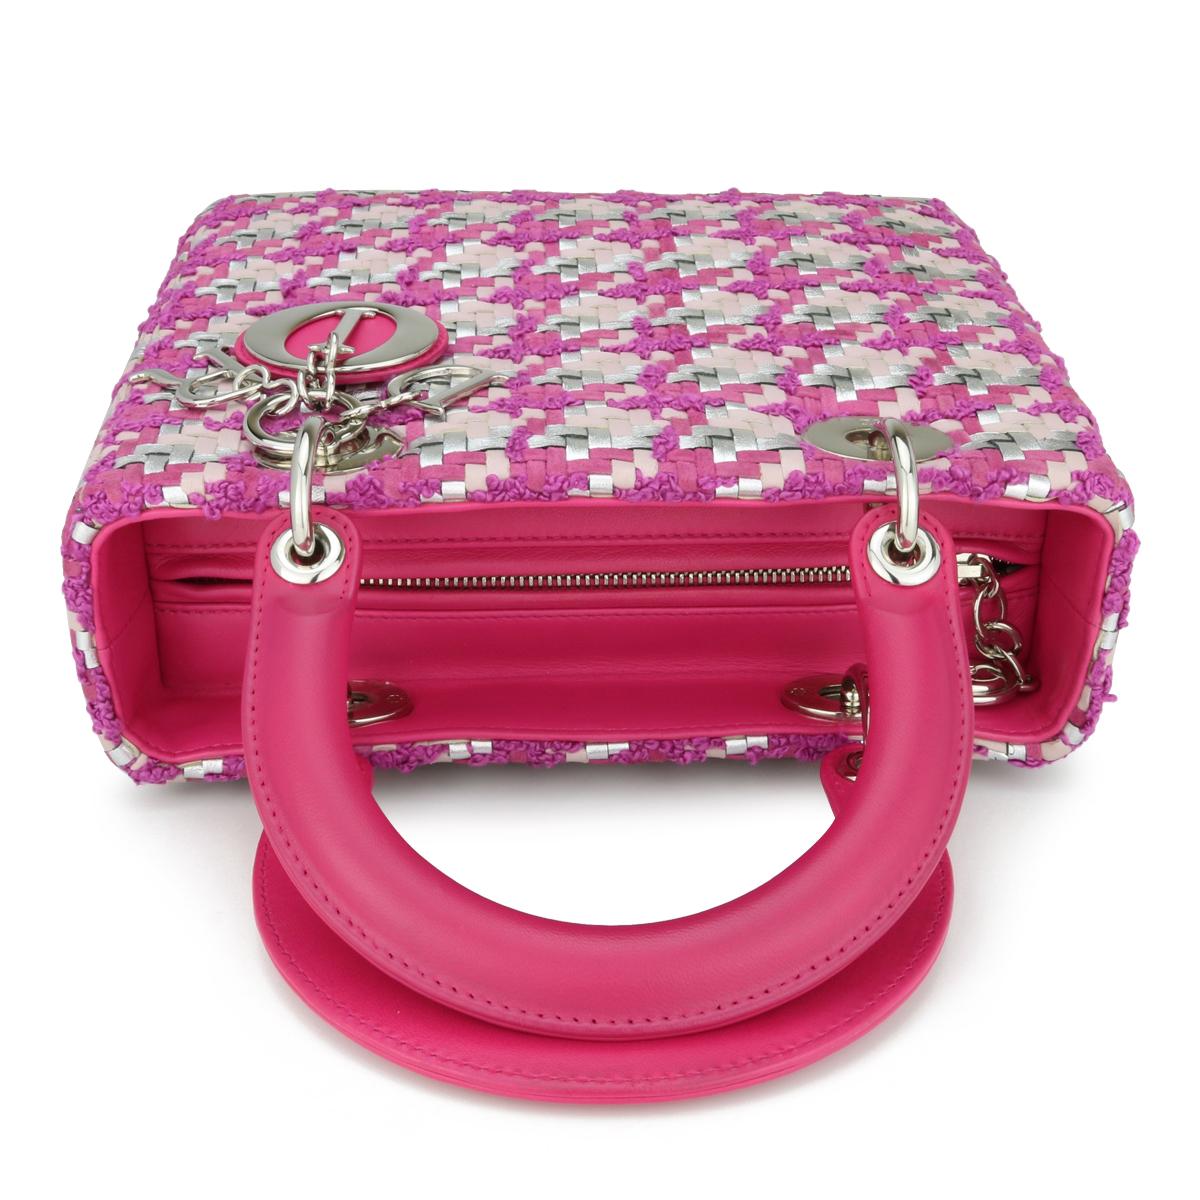 Christian Dior Lady Dior Medium Bag in Pink & Silver Tweed & Leather SHW 2013 For Sale 9